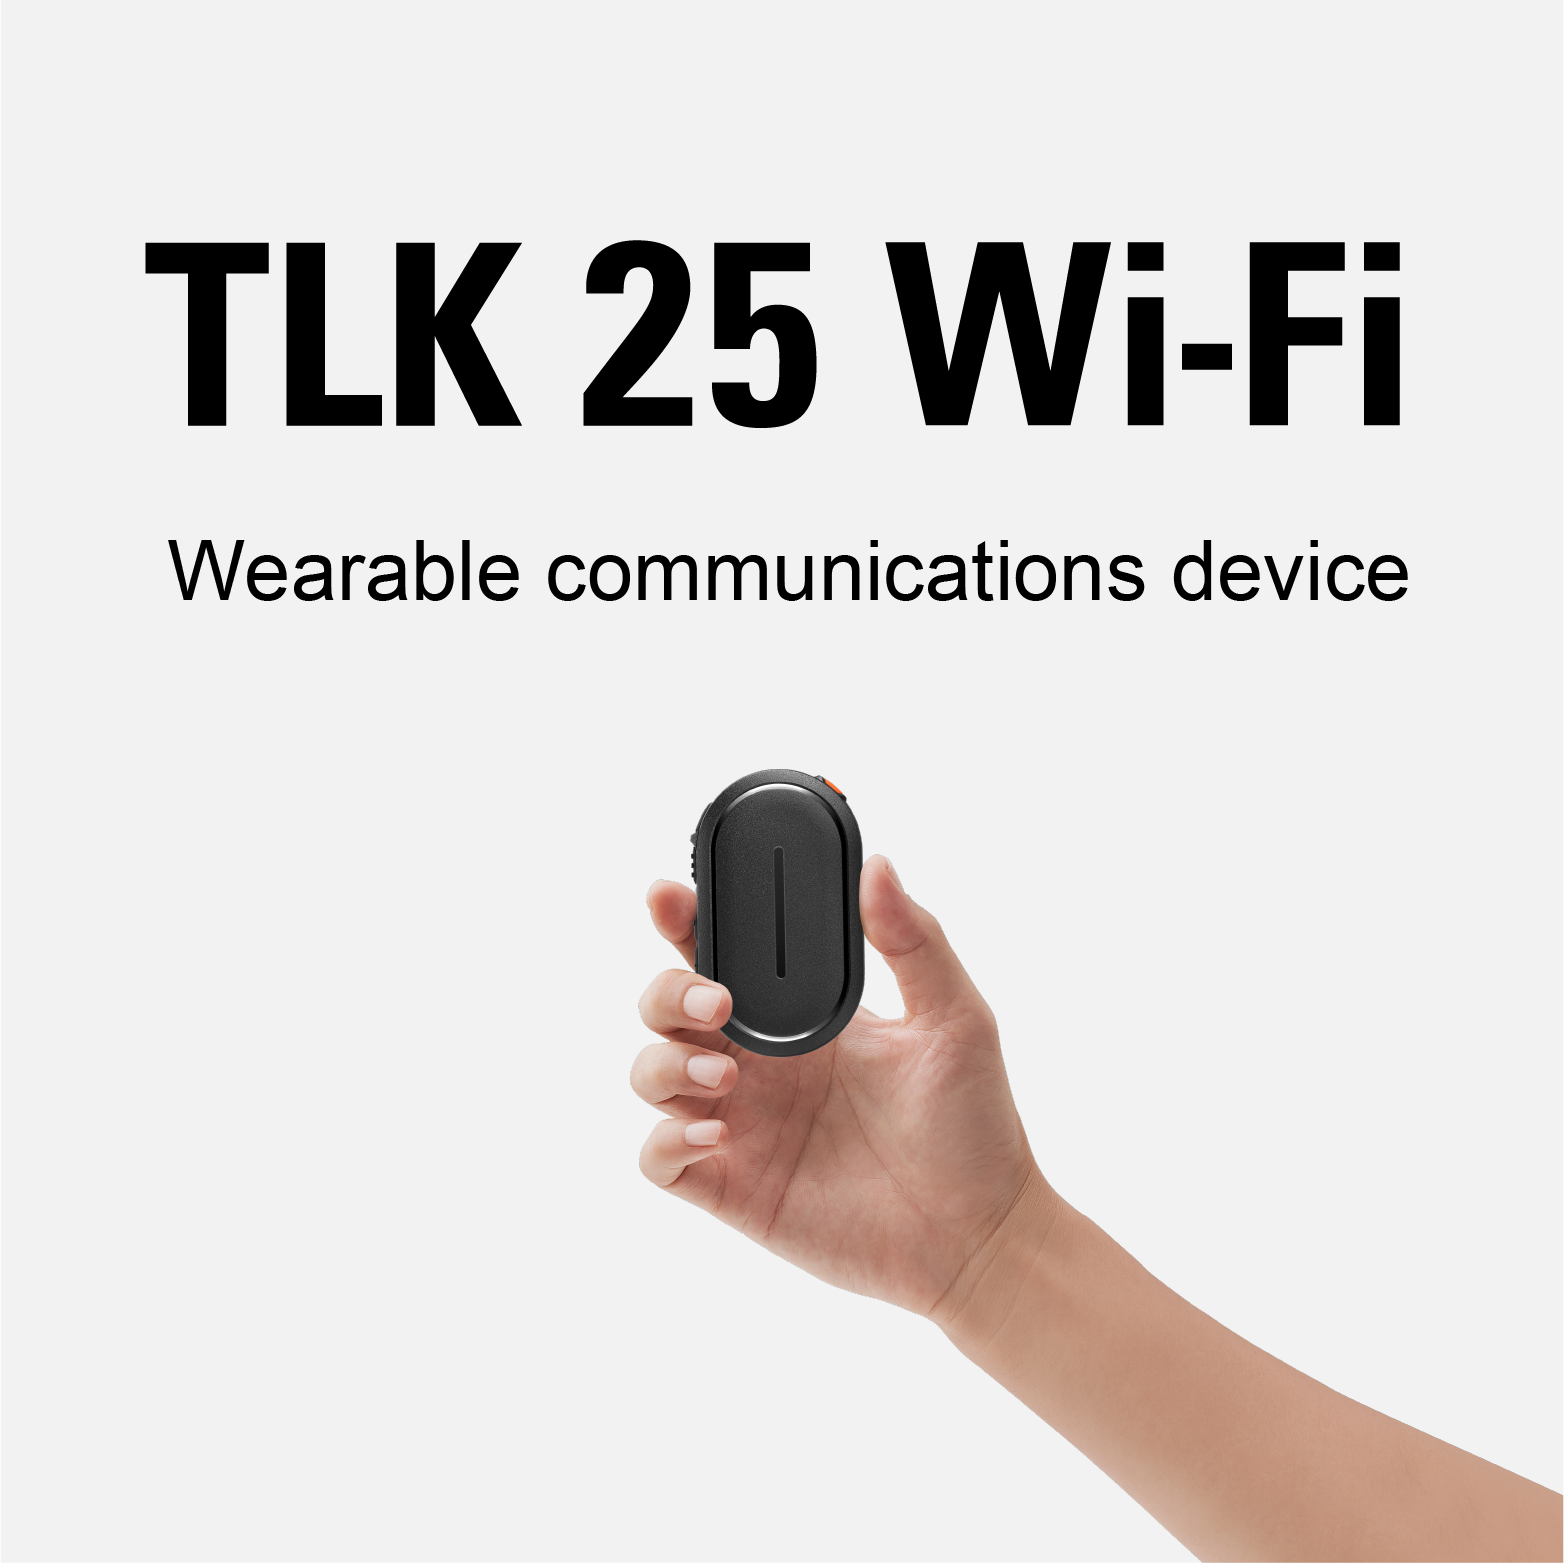 TLK 25 wearable communications device in hand